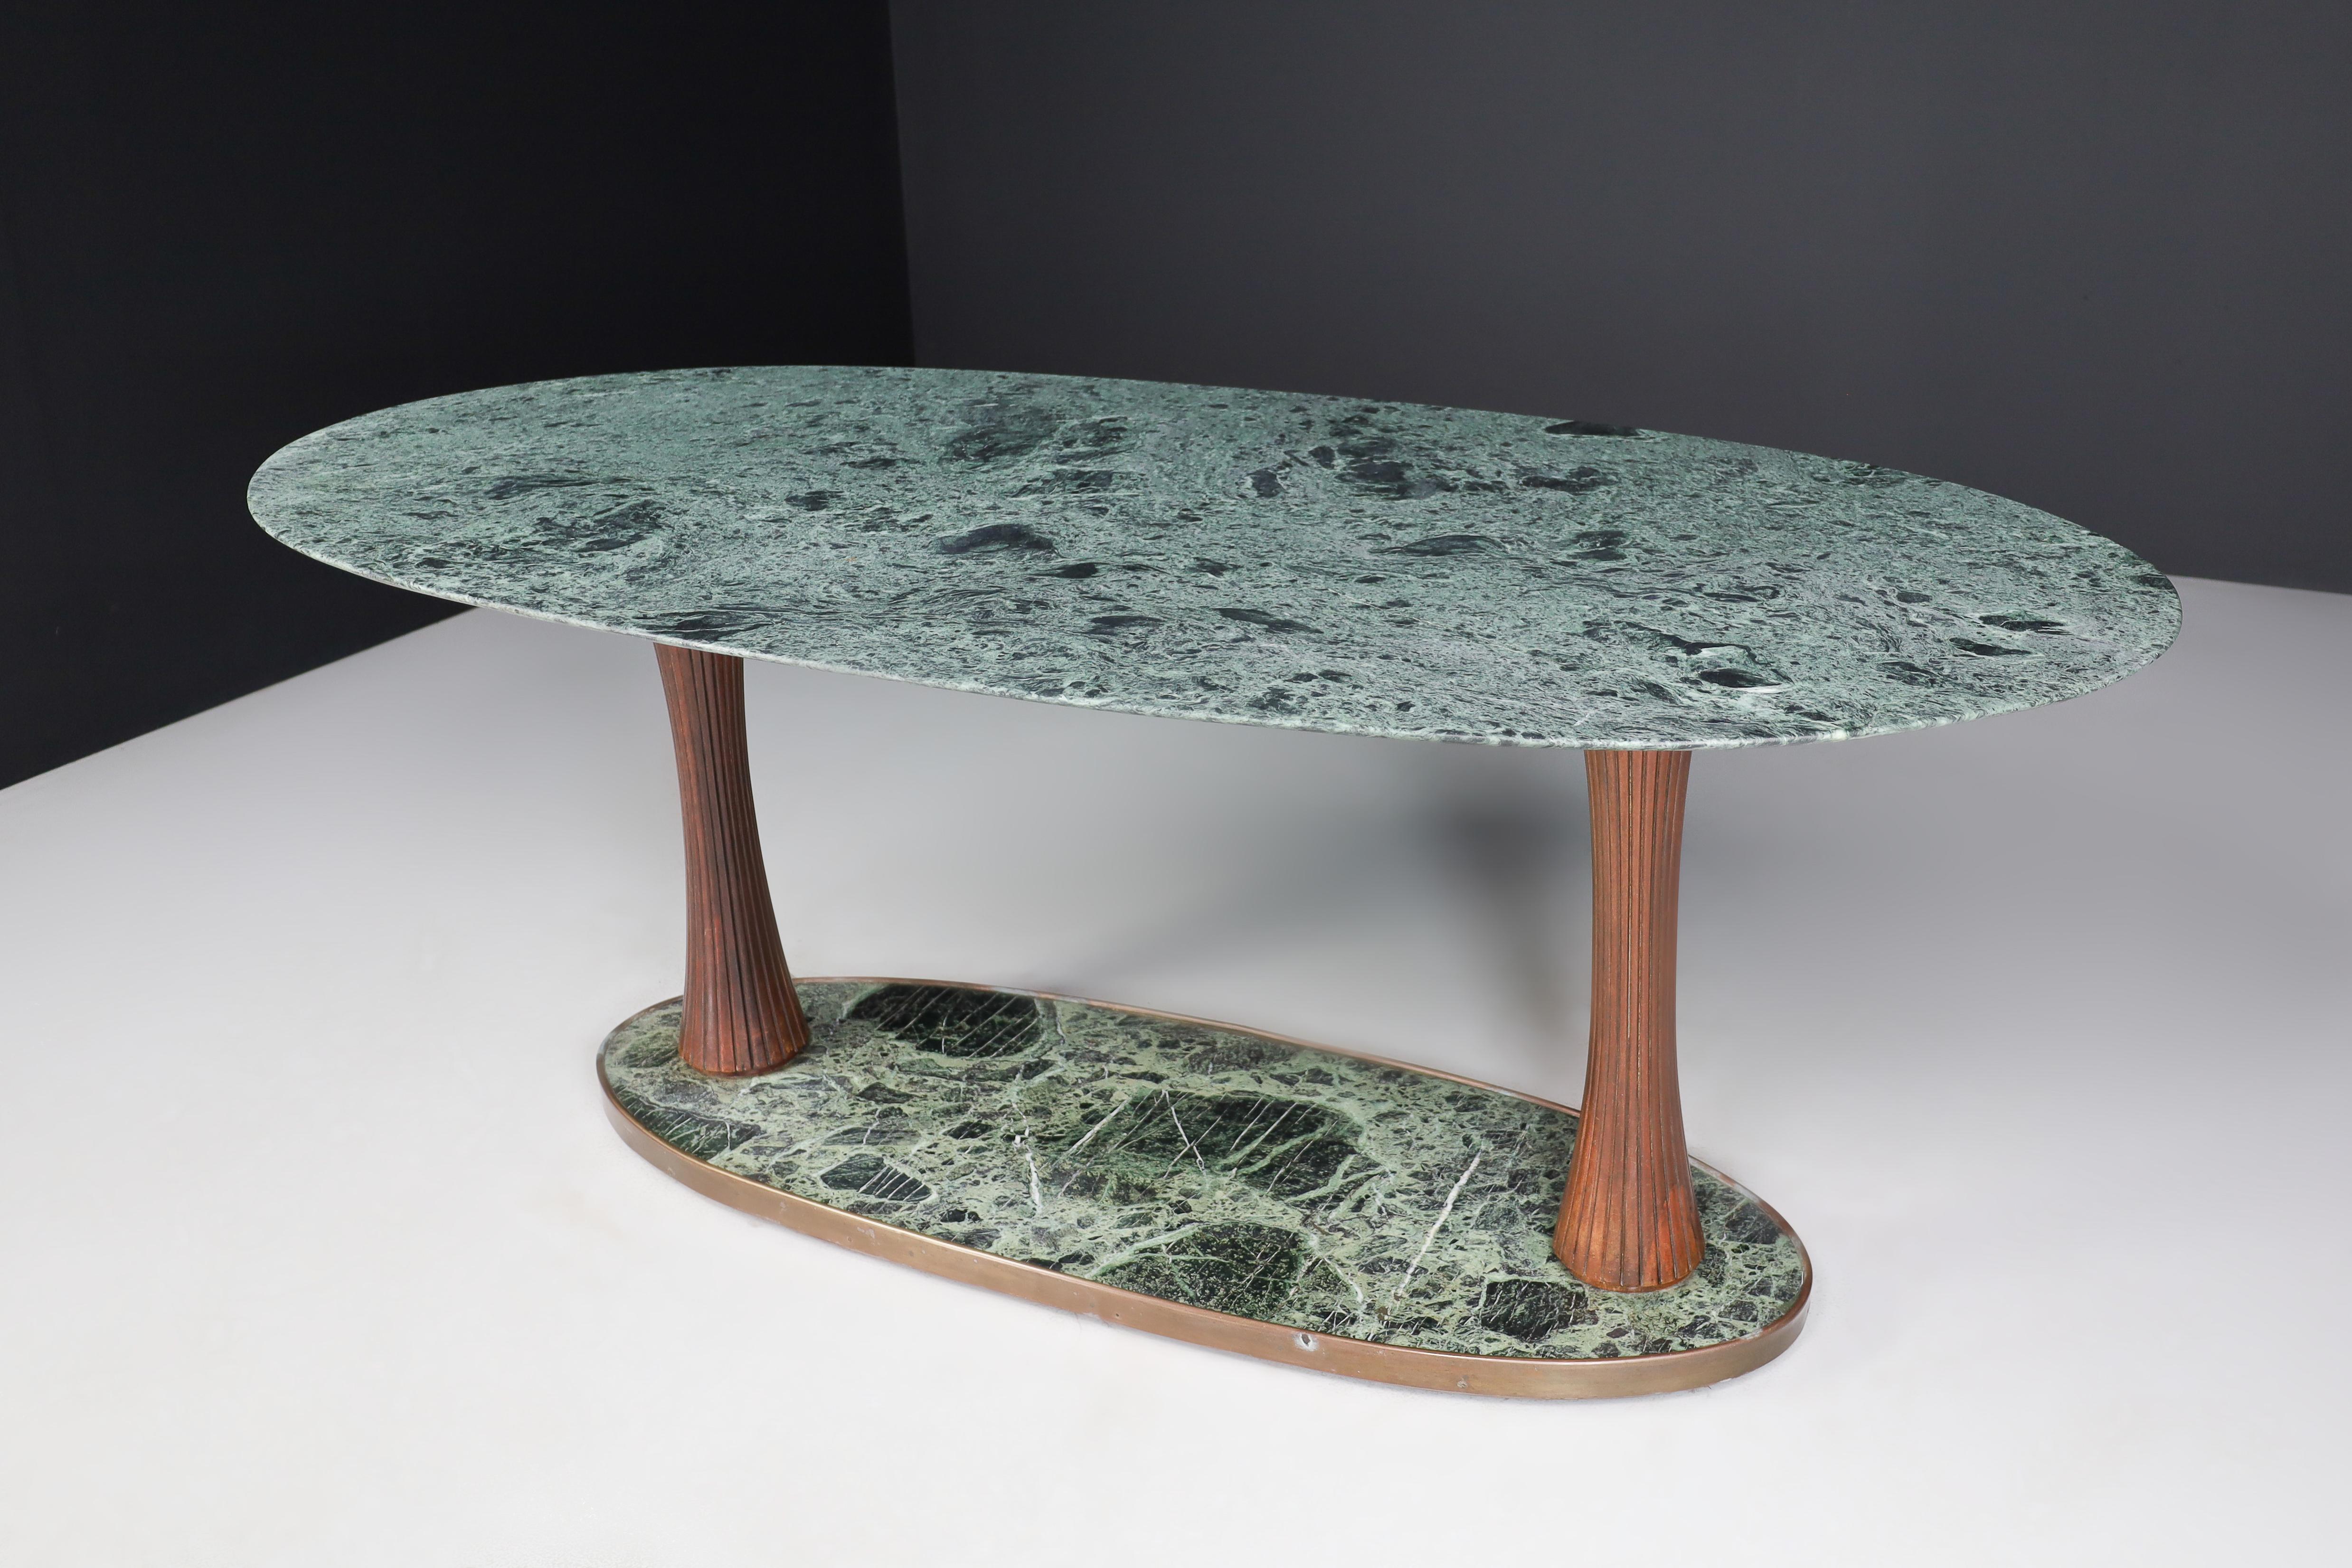 Vittorio Dassi dining or center table in Alpi Verdi Marble, Italy 1950s

Elegant dining or center table by Vittorio Dassi with an Alpi Verdi marble top and base, very well designed by Vittorio Dassi in the 1950s. It's a great item; both the